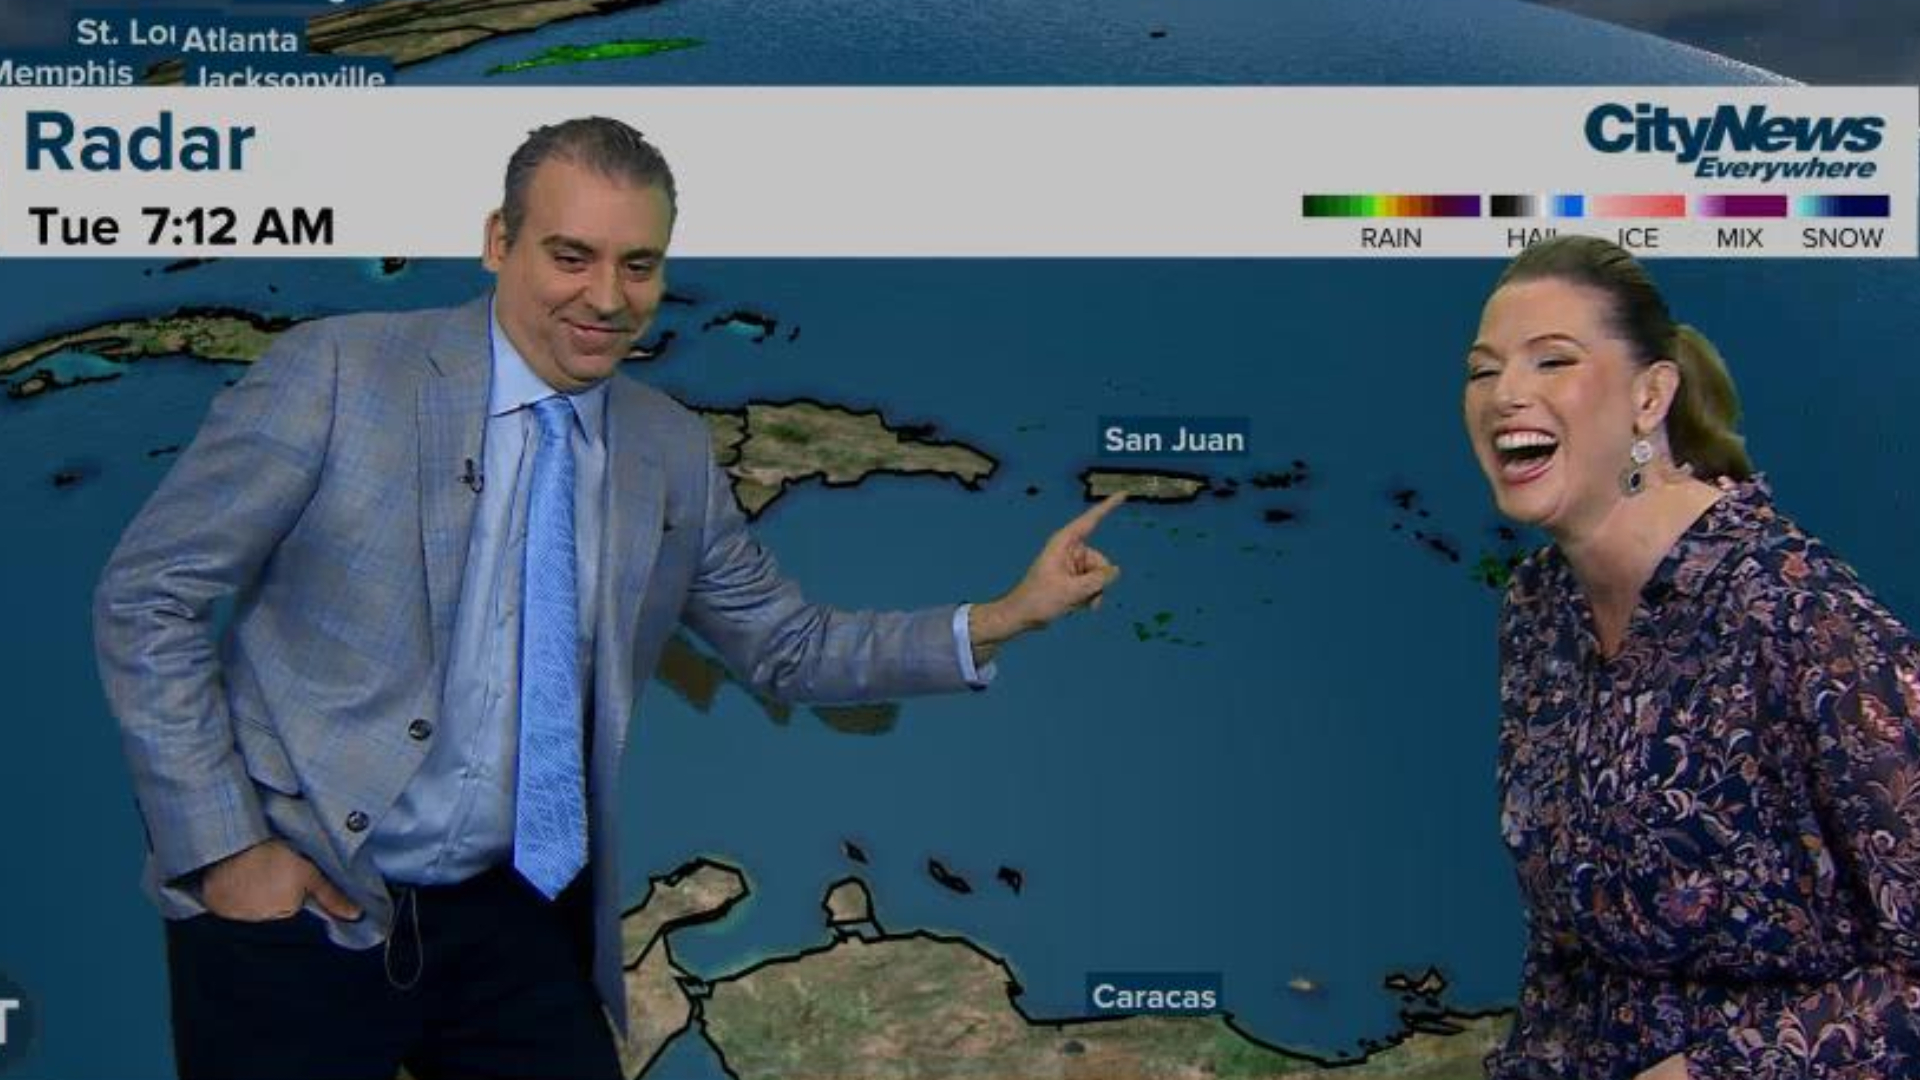 We put Sid and Dawn's weather reporting skills to the test